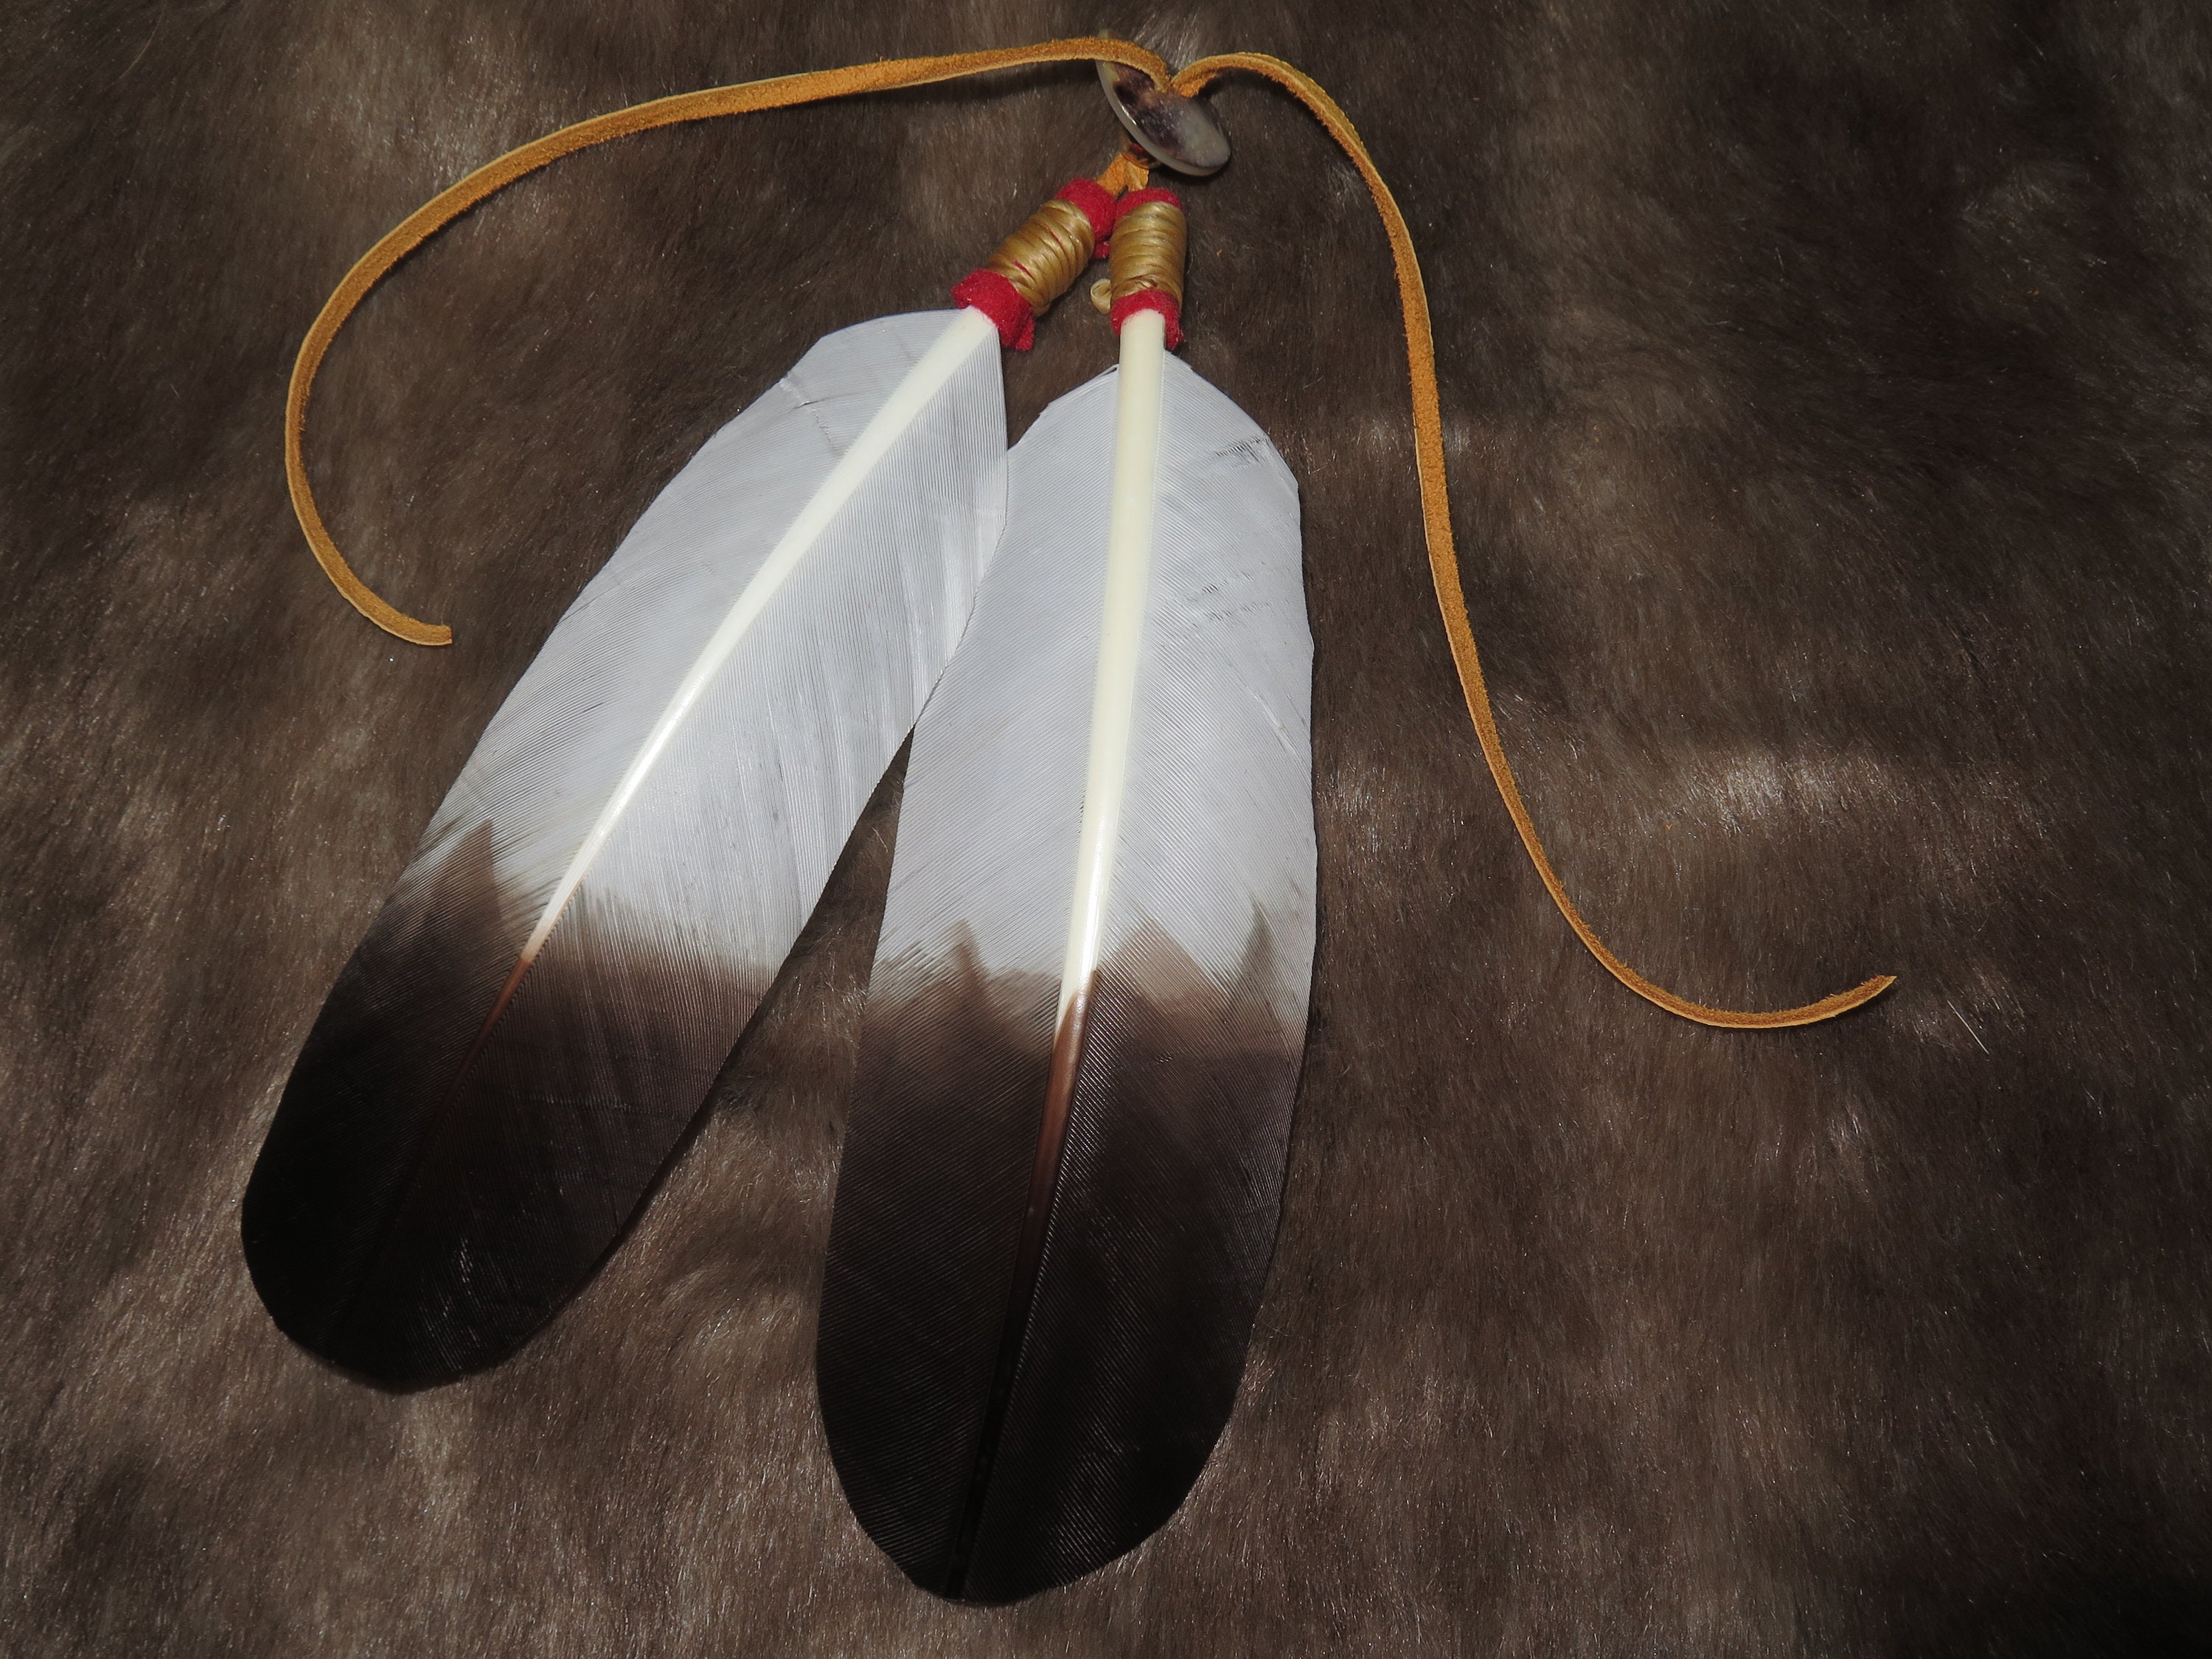 Native American Hair Tie as part of your Regalia hand made Golden Eagle  Feathers are attached that's the Symbolism and Power